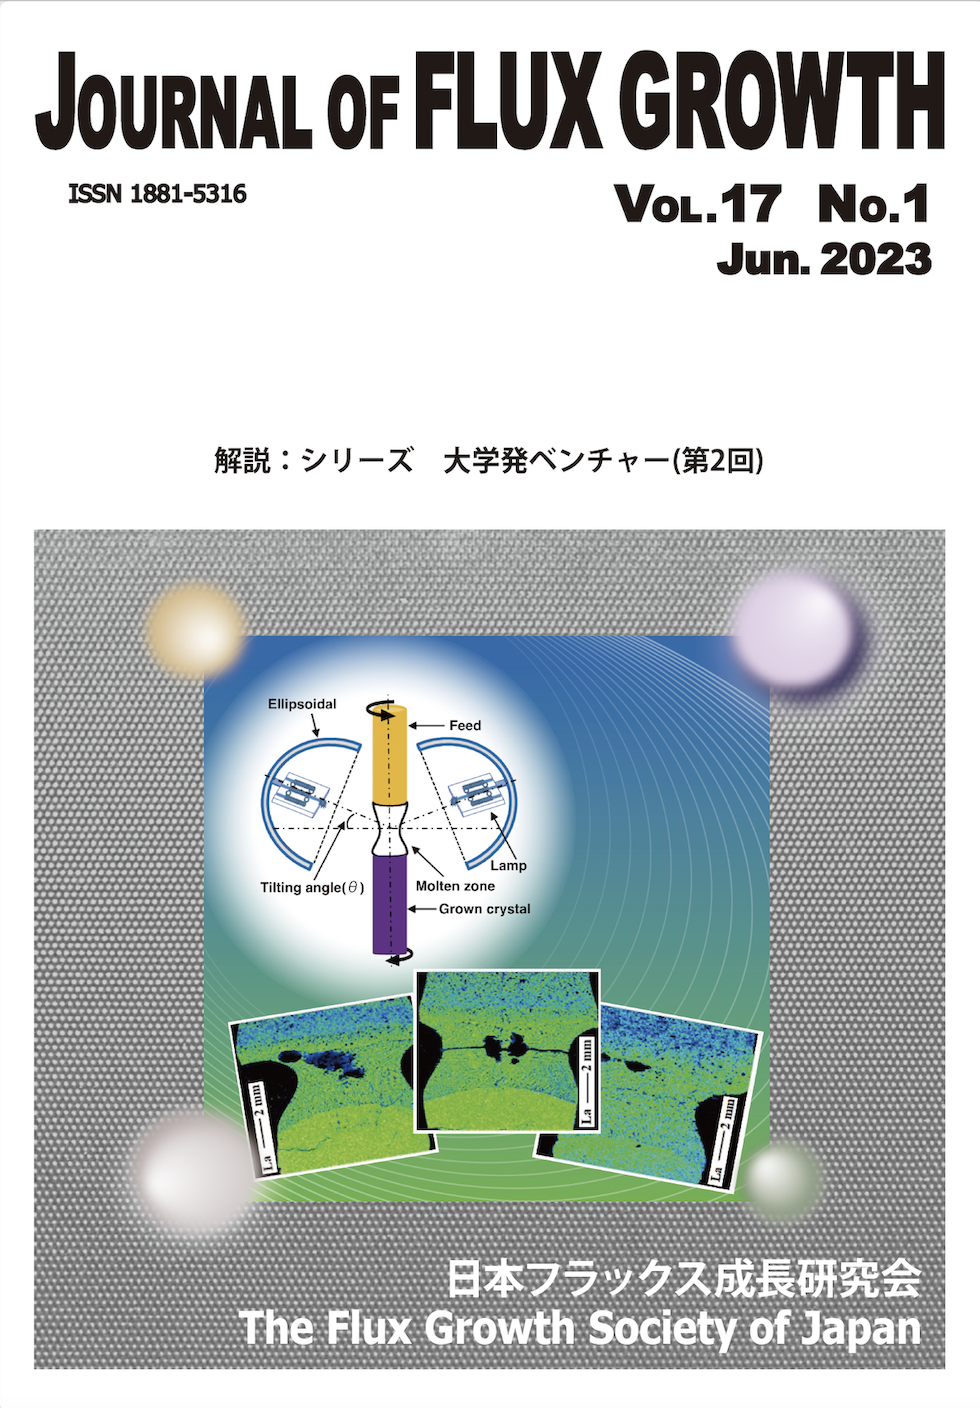 JOURNAL OF FLUX GROWTH Vol.17 No.1